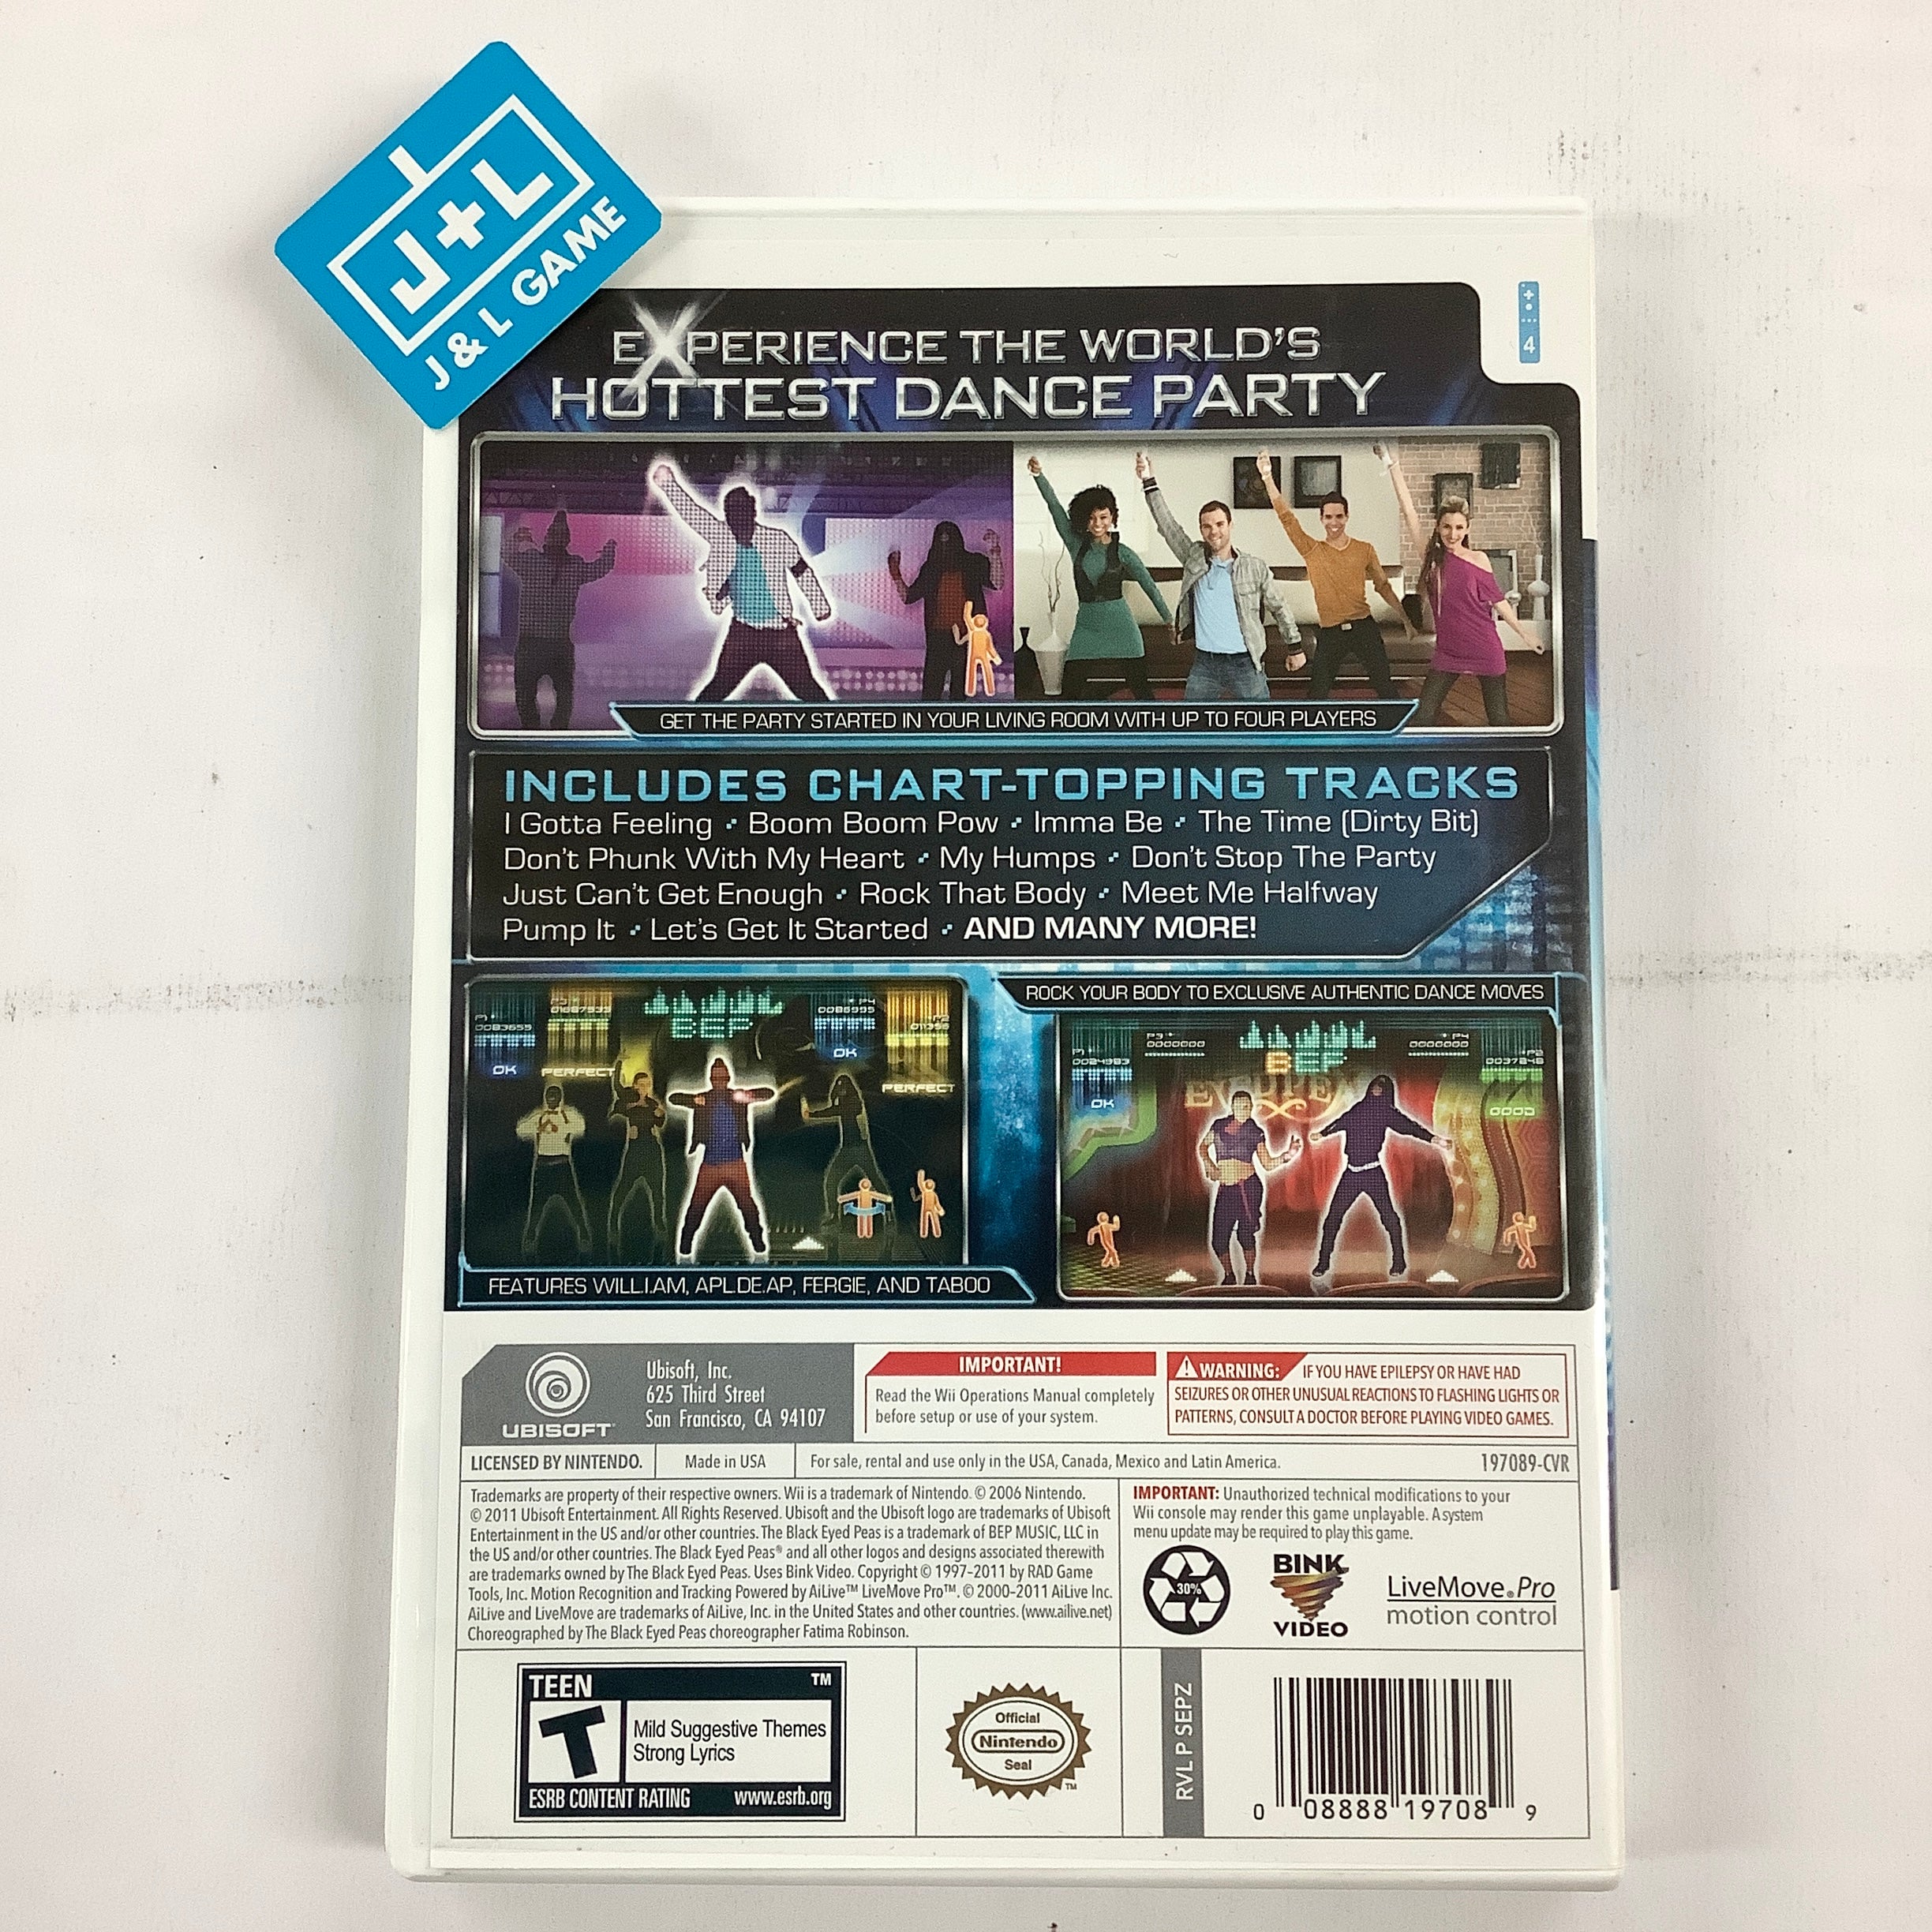 The Black Eyed Peas Experience - Nintendo Wii [Pre-Owned] Video Games Ubisoft   